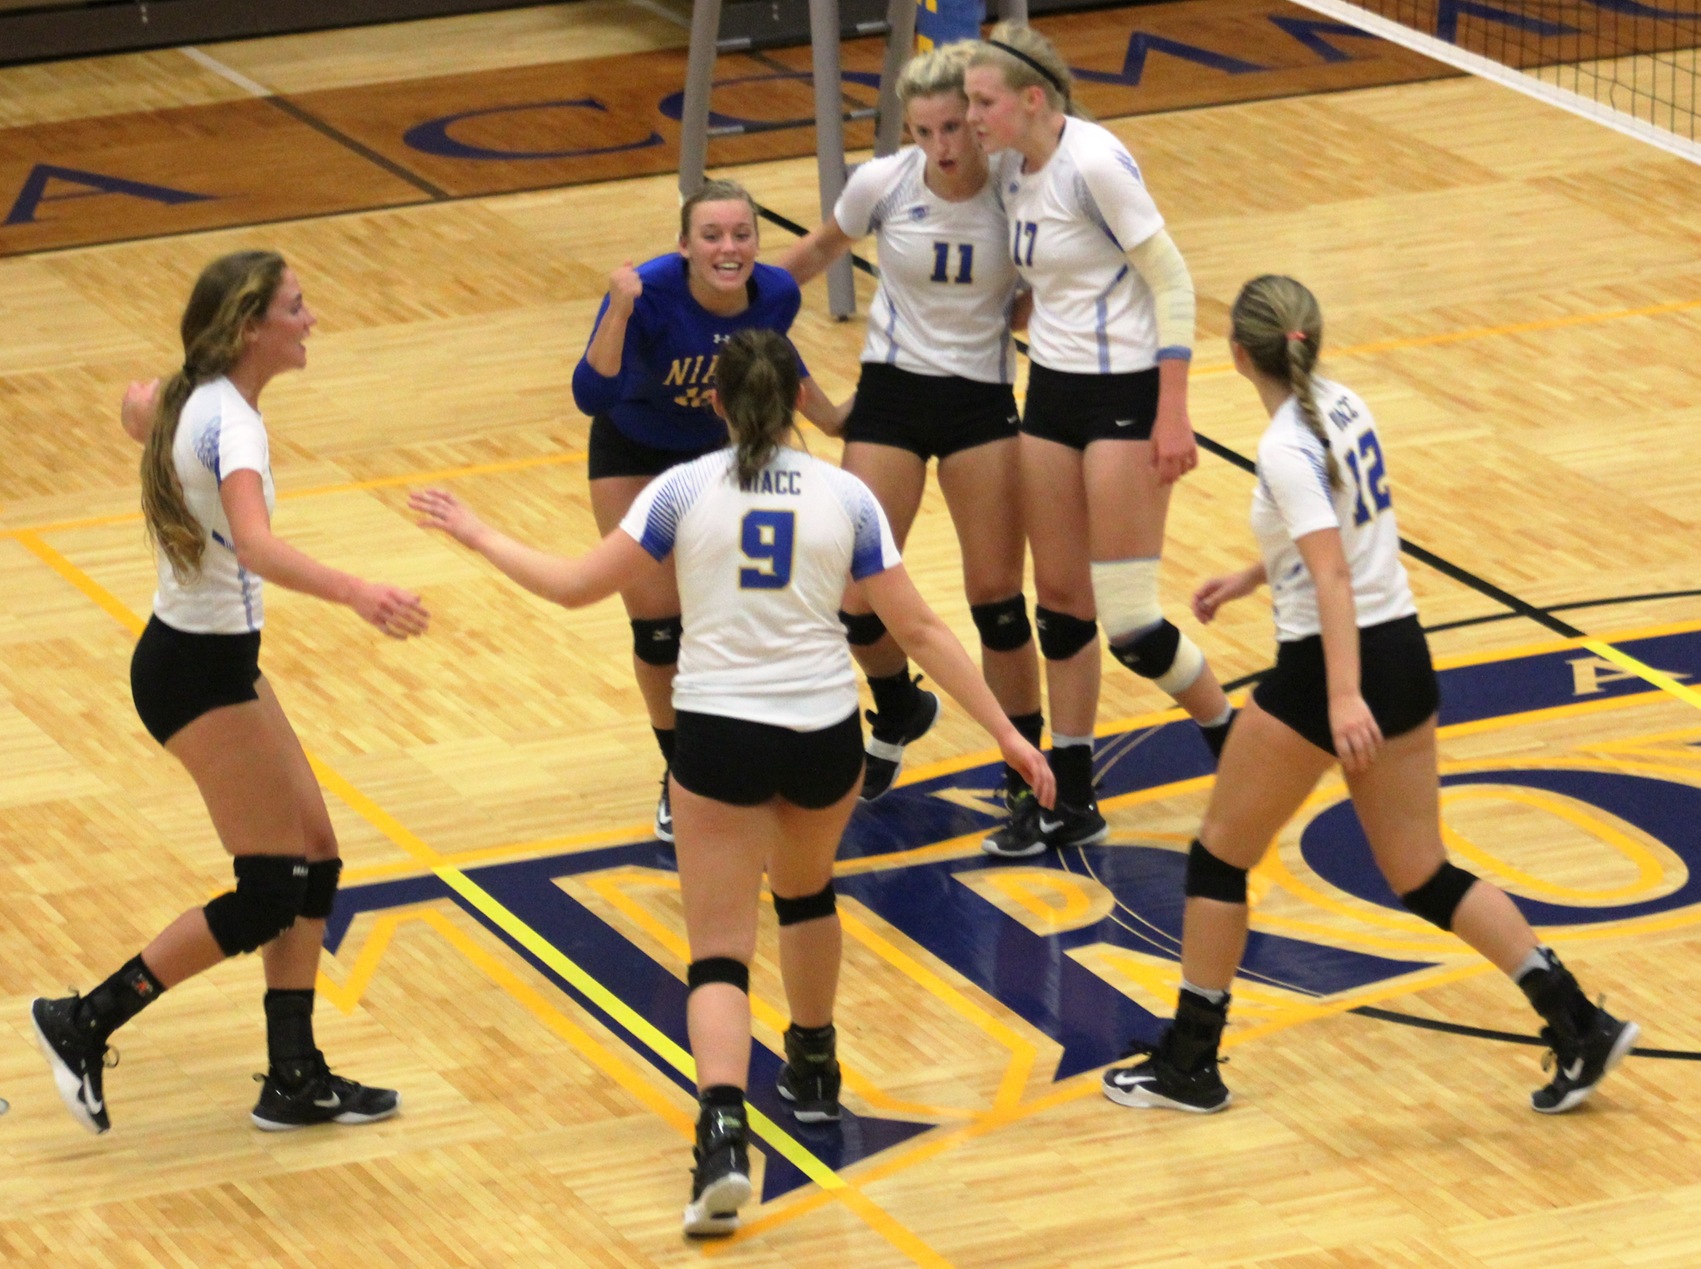 NIACC players celebrate a point in Wednesday's  home match against Northeast CC.